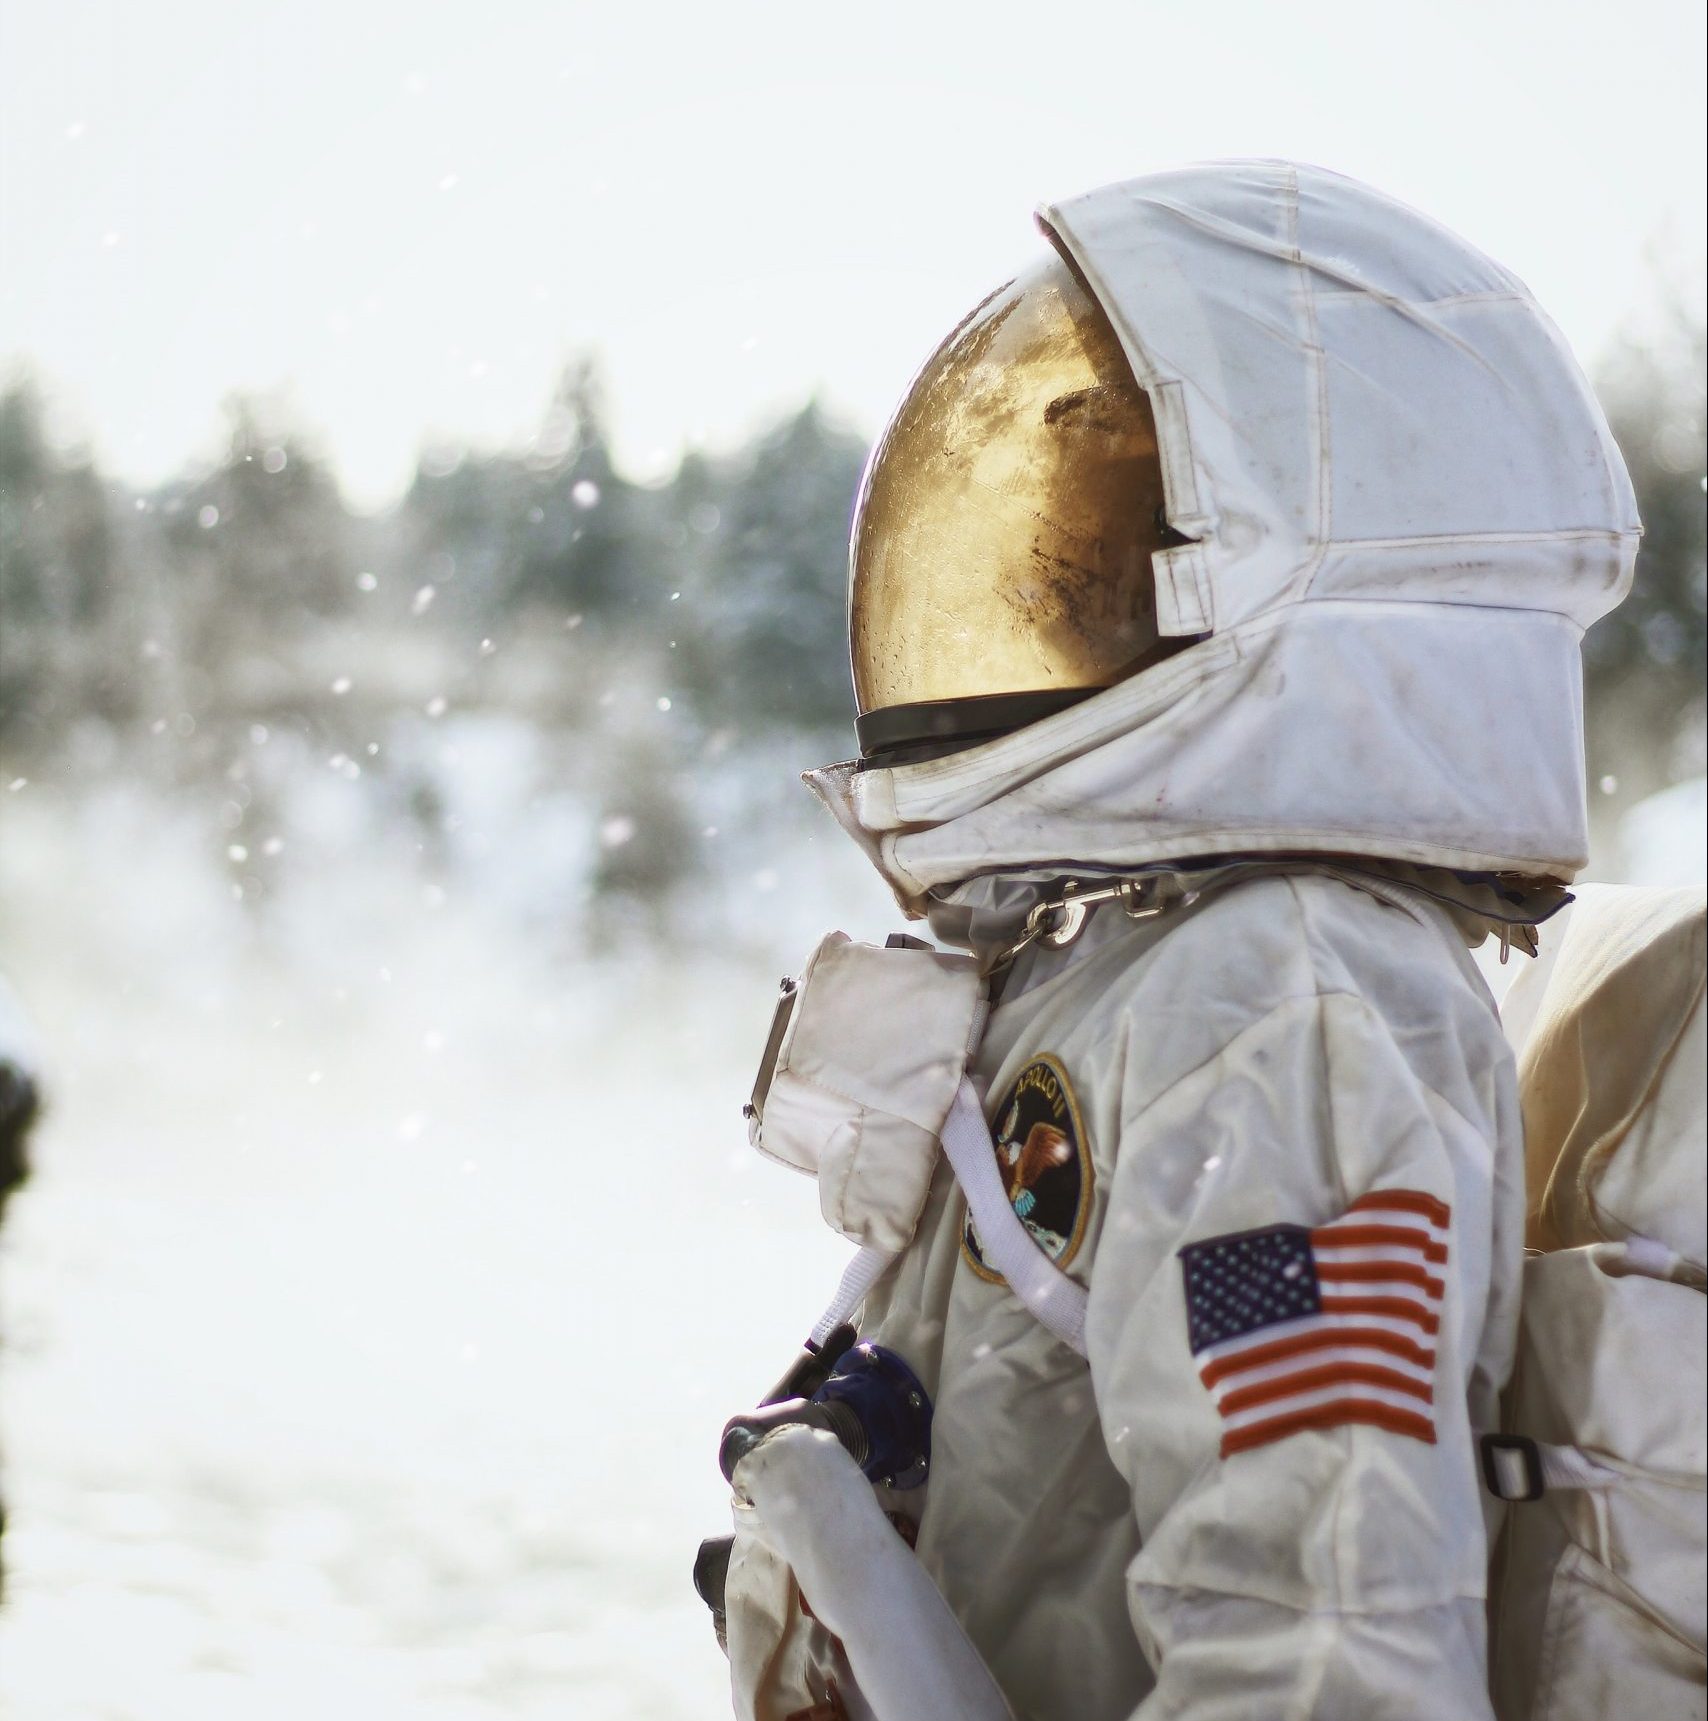 Astronaut with an American flag design on the arm of the suit.